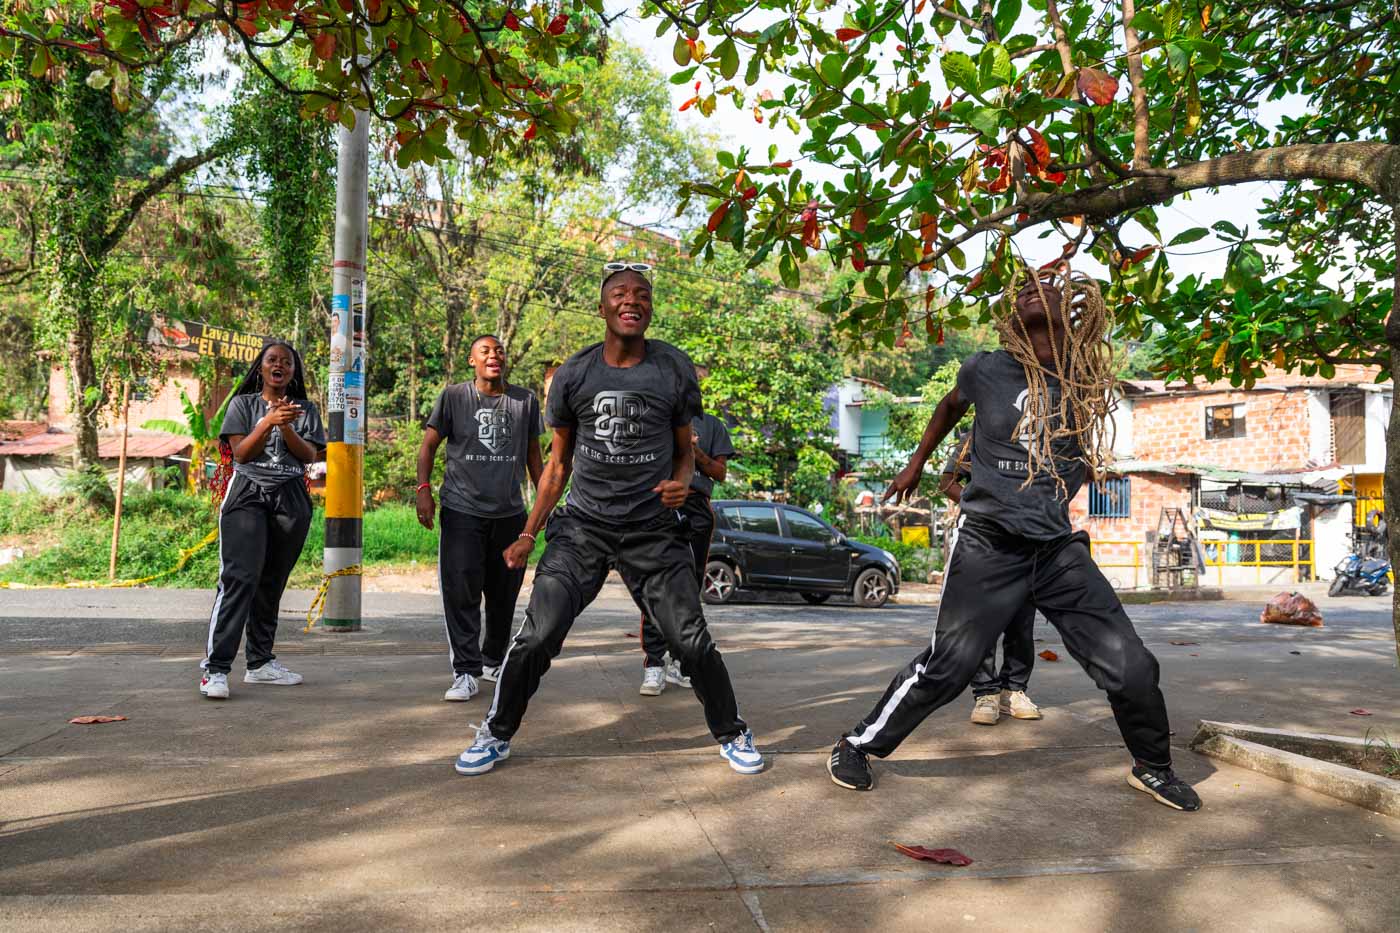 A local Afro-Caribbean dance troupe mid-dance under a tree..